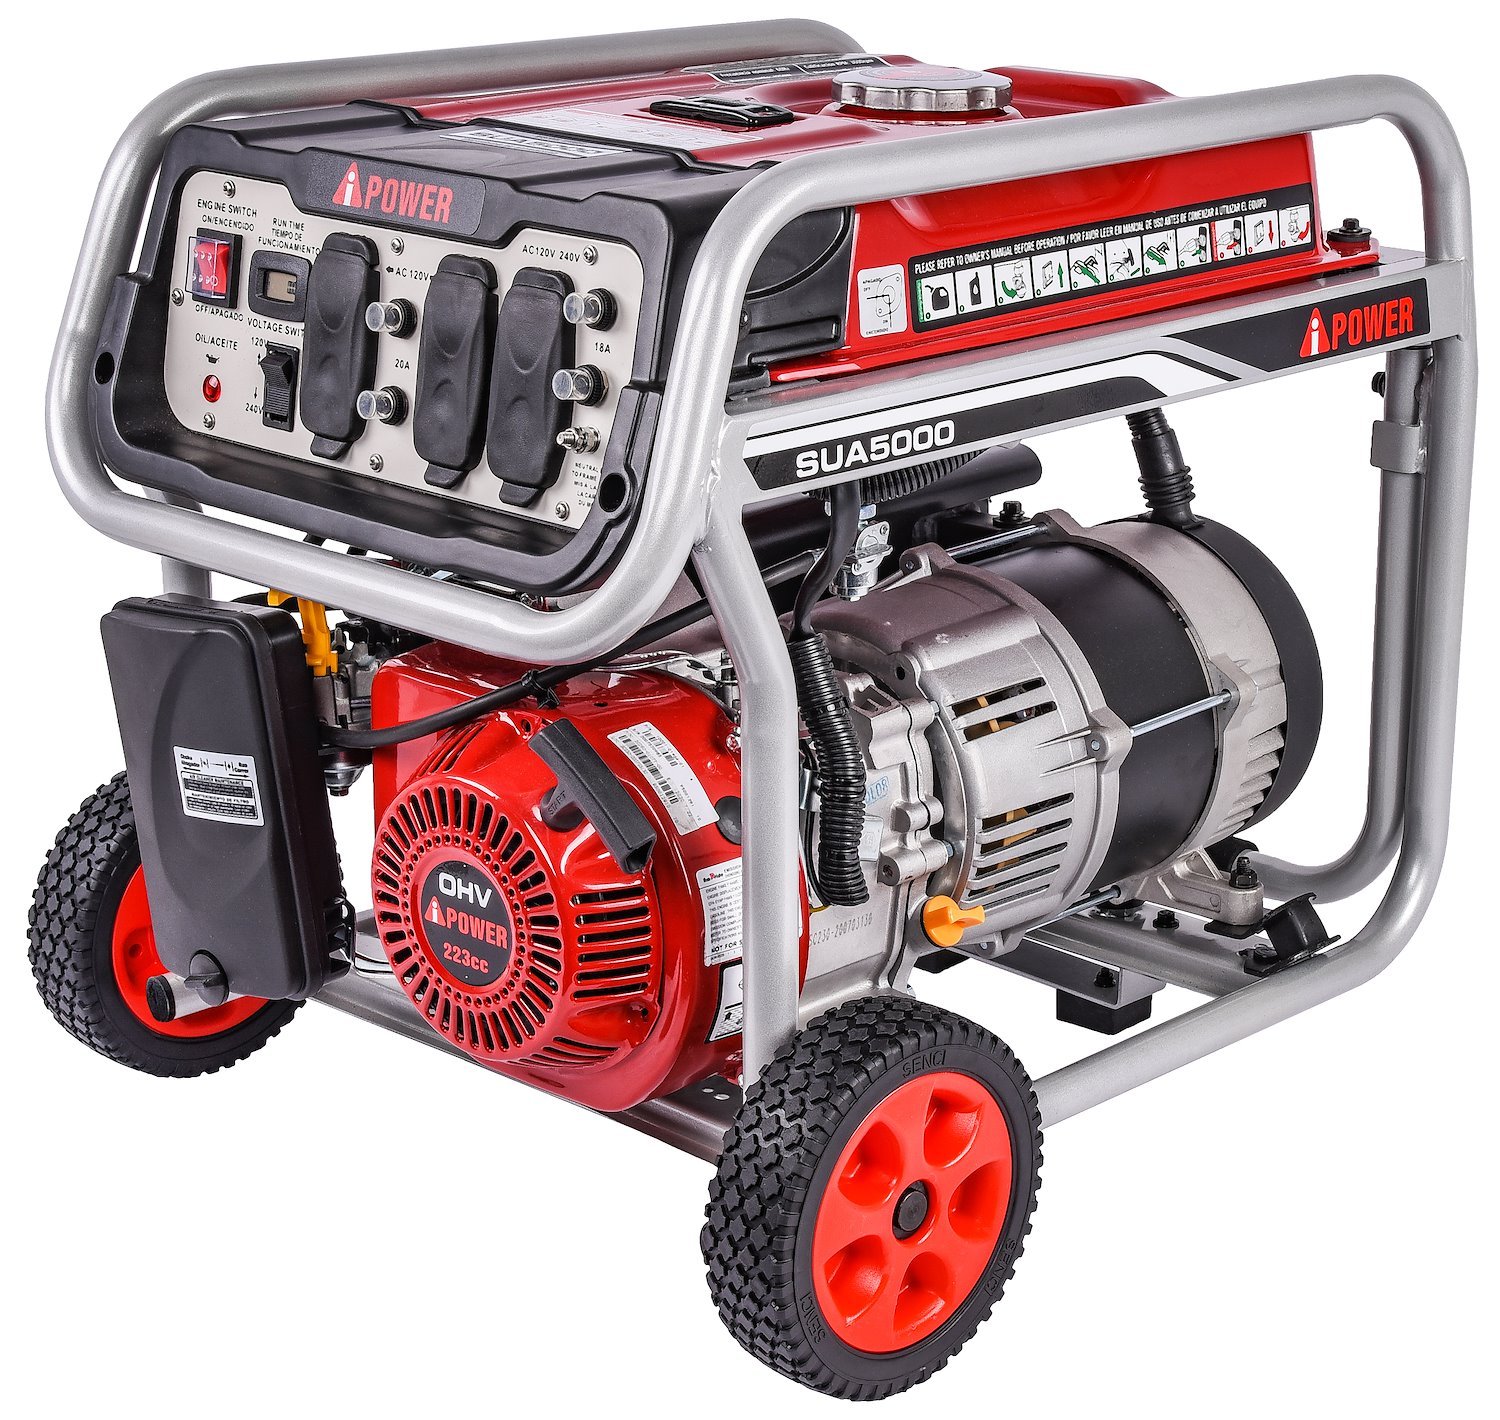 Portable Generator with Recoil Pull Start, Quiet 68db Operation [5000 Starting Watts, 7.5 Horsepower]